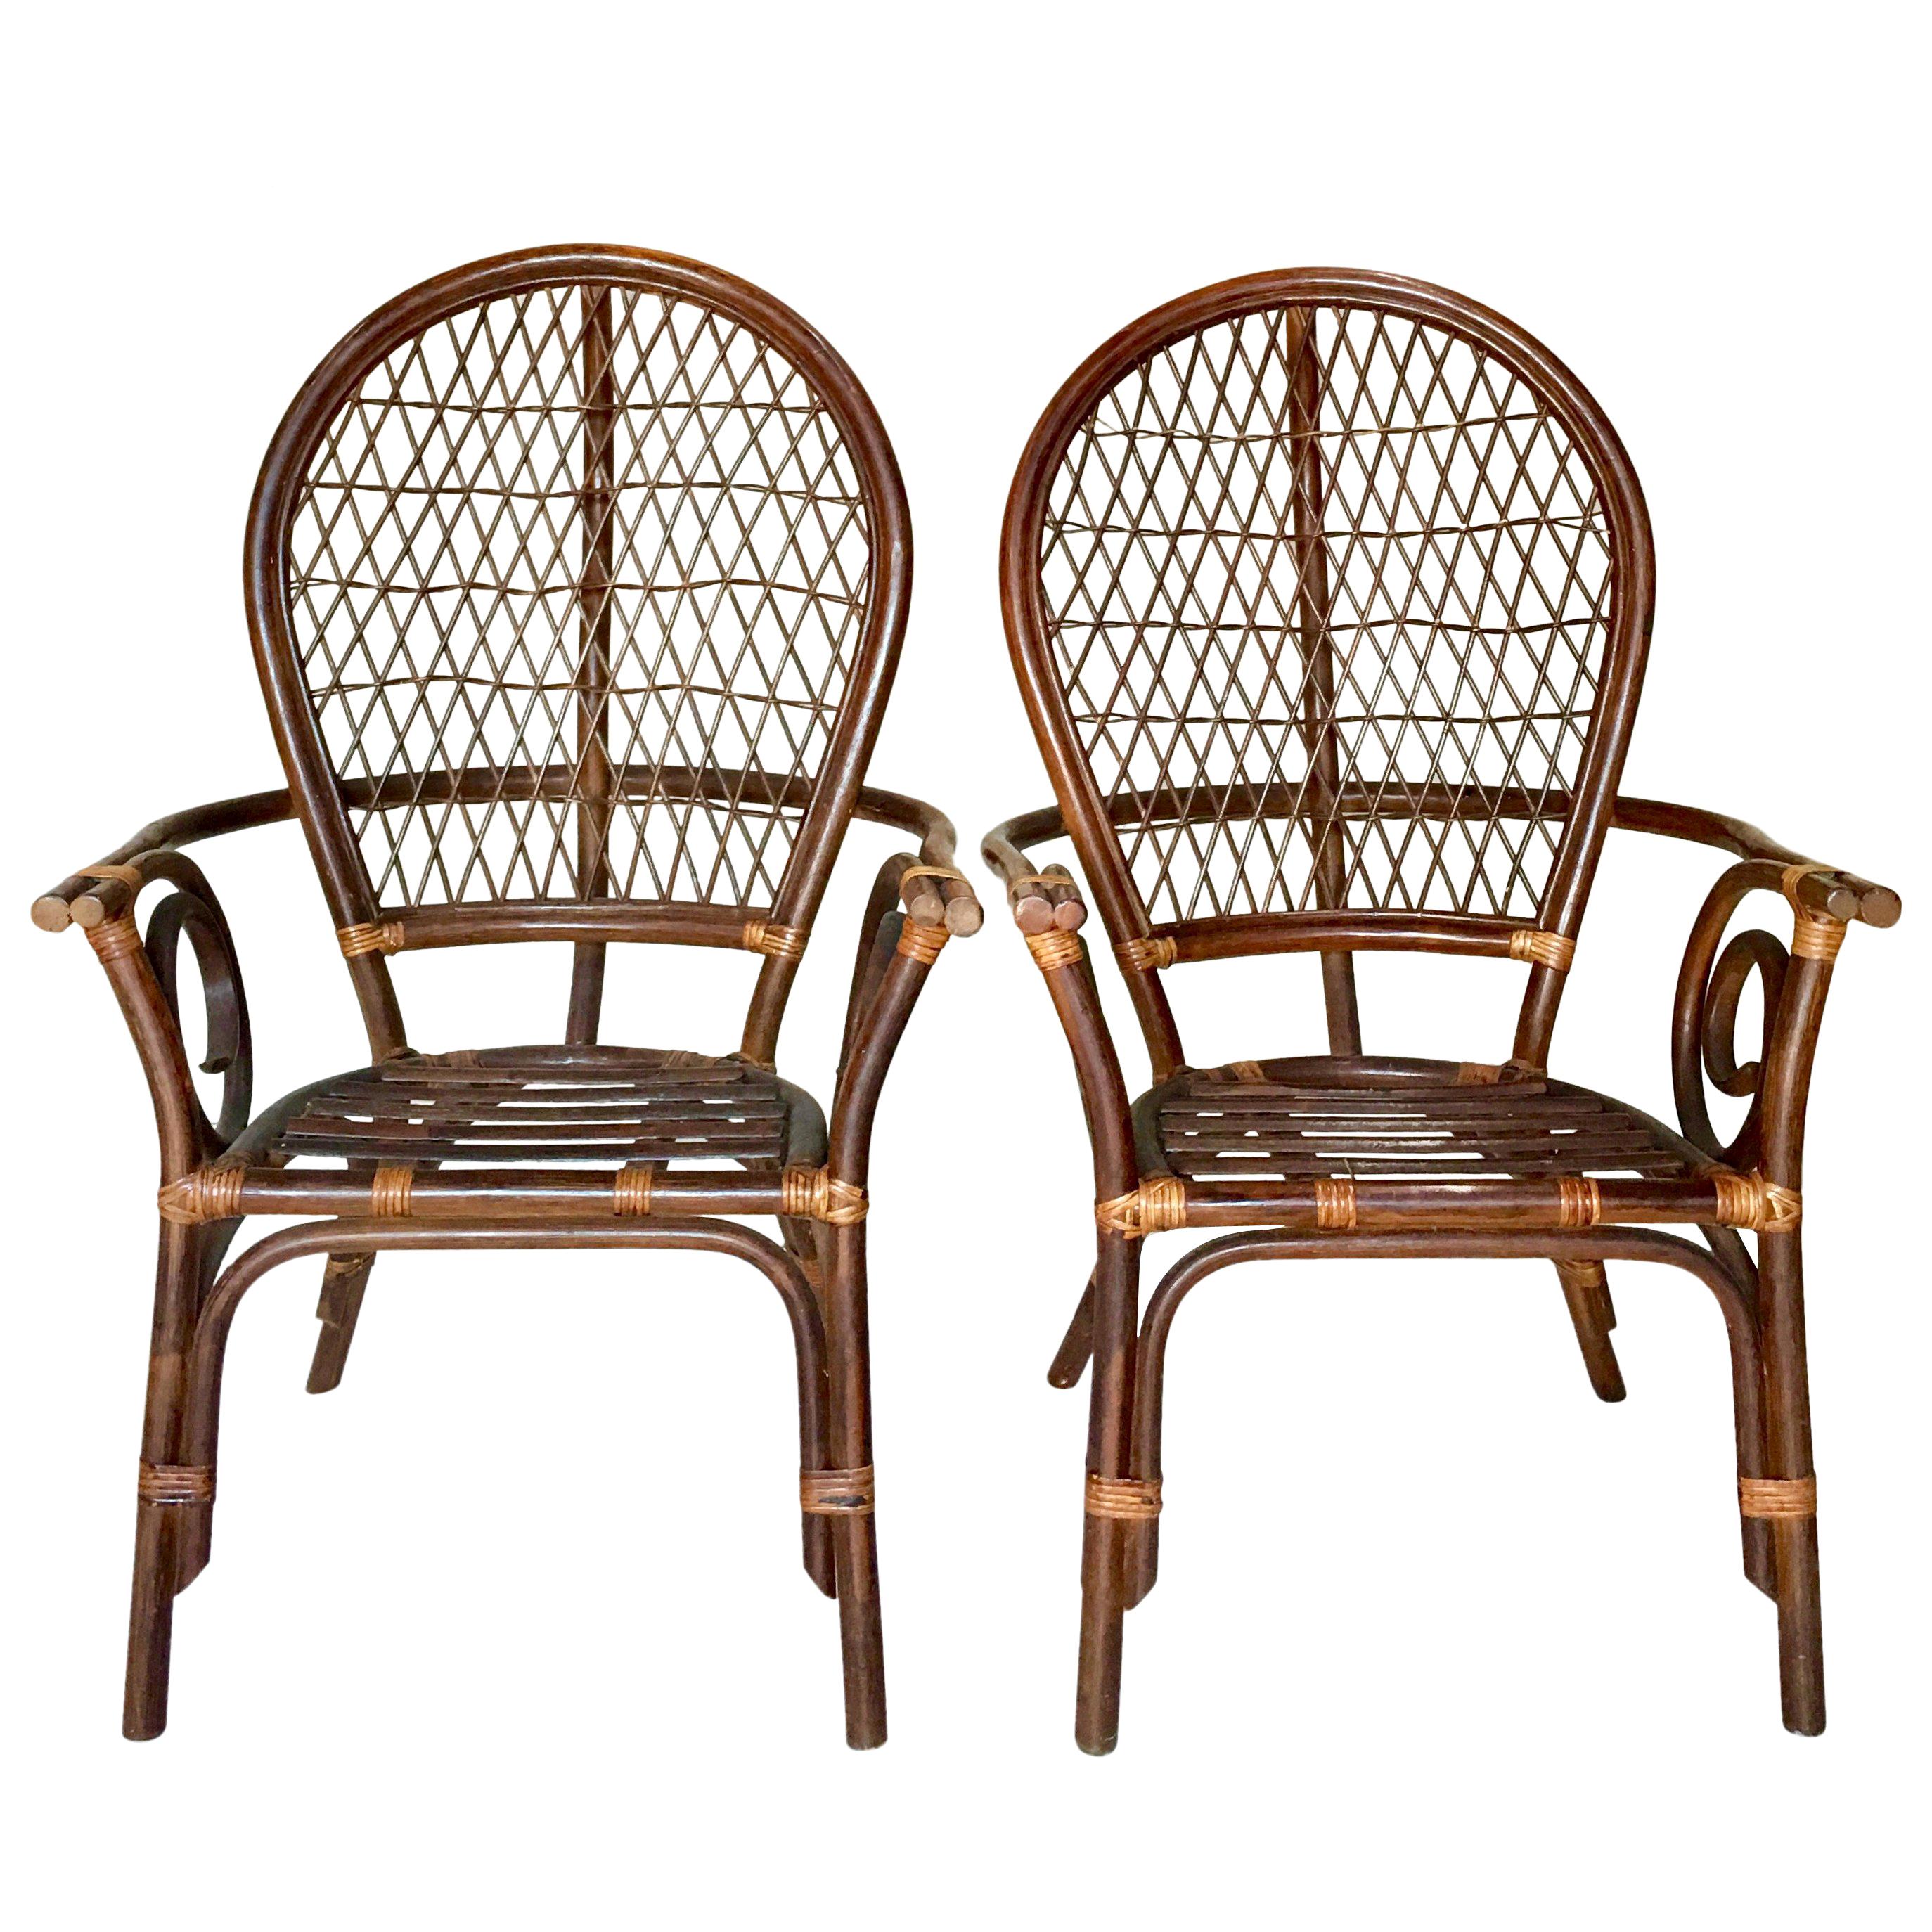 20th Century Pair of Bent Rattan and Wicker High Back "Balloon" Armchairs